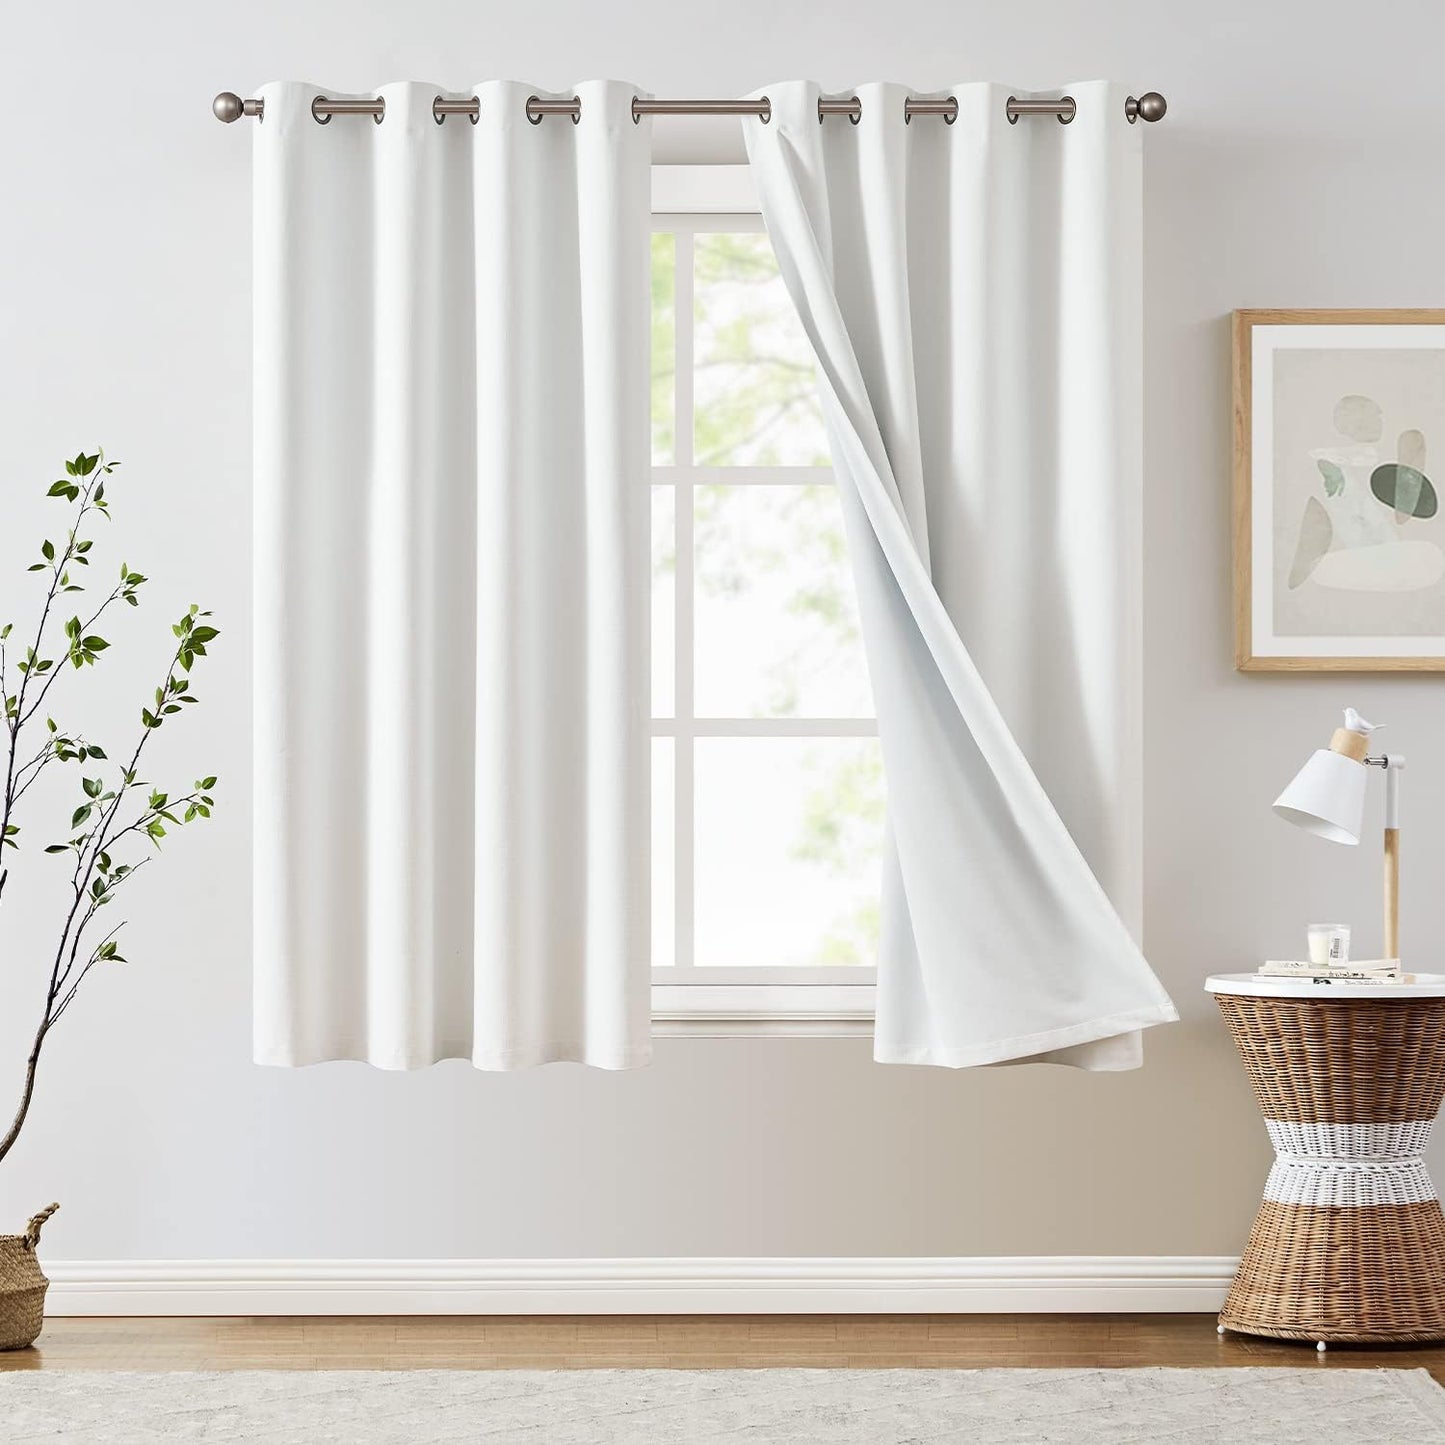 JINCHAN 100% Blackout Curtains for Bedroom, 90 Inch Length Linen Textured Drapes for Living Room, Thermal Insulated Full Light Blocking Curtains, Grommet Top Window Treatments 2 Panels Heathered White  CKNY HOME FASHION Textured | Off White W50 X L63 